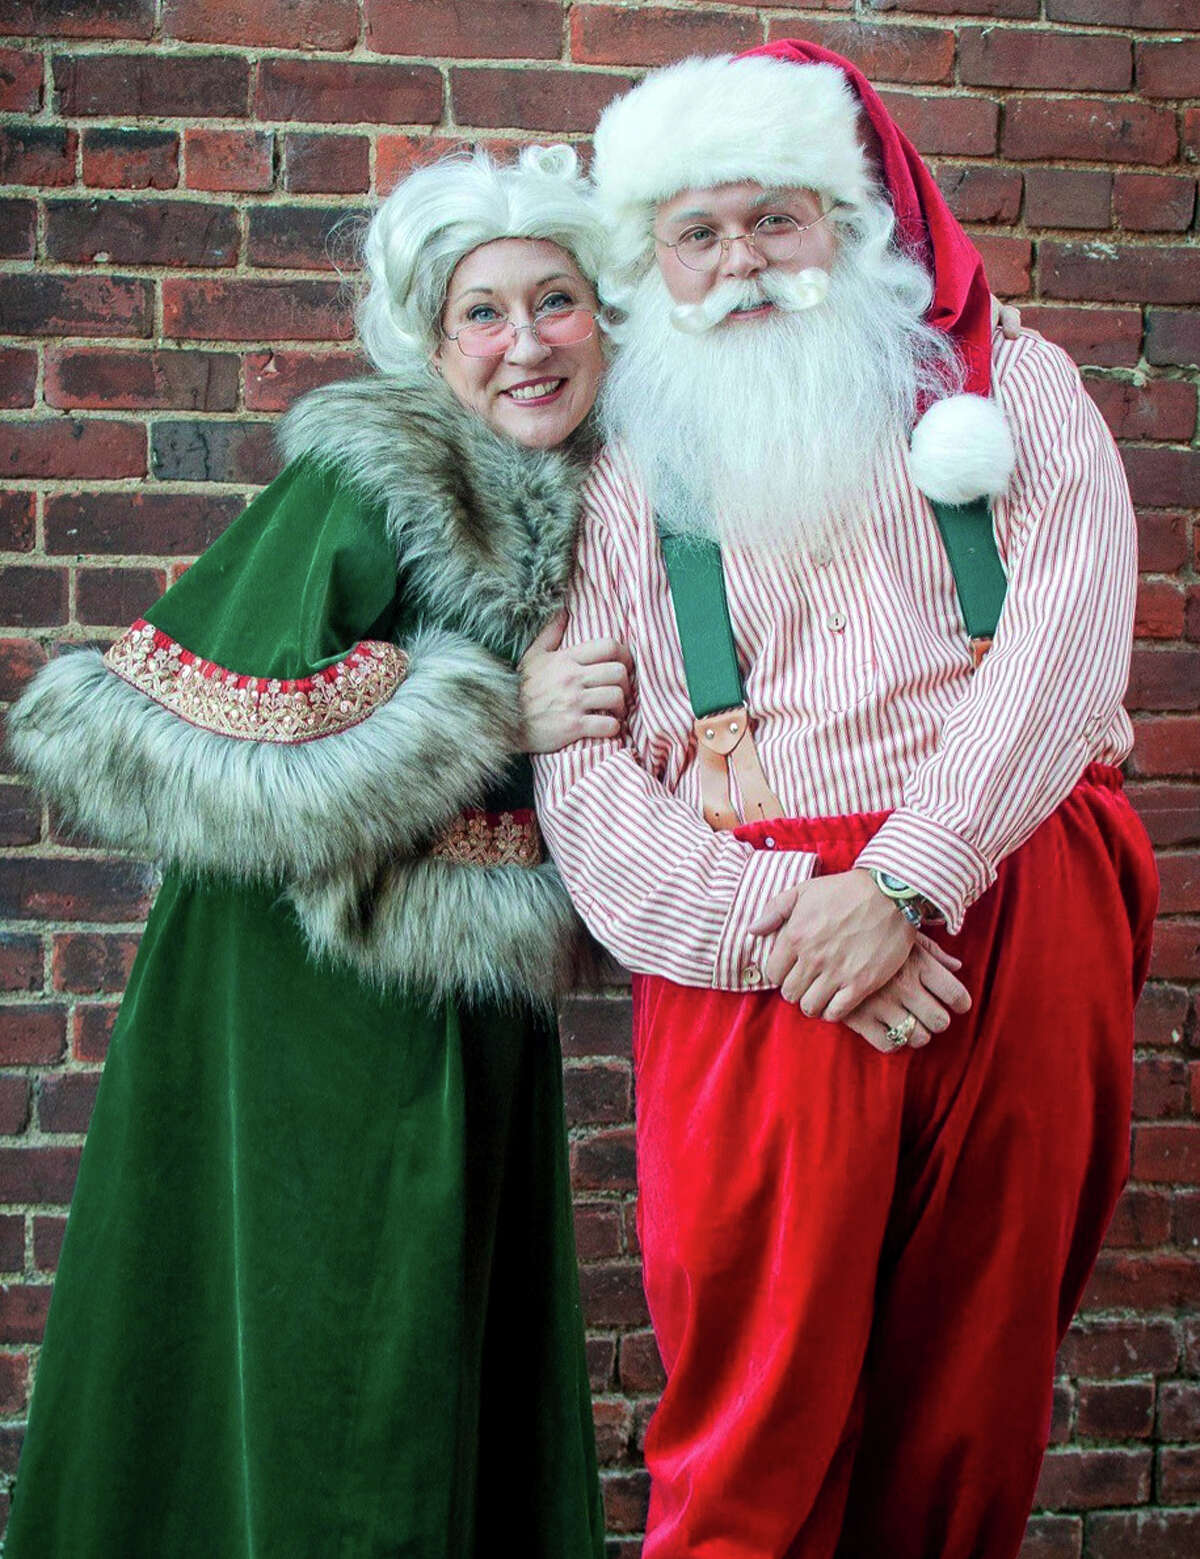 At age 21, Hunter Woodson, right, with Ashley Carter as Mrs. Claus, is pretty young to play Old St. Nick, but he's able to pull it off.